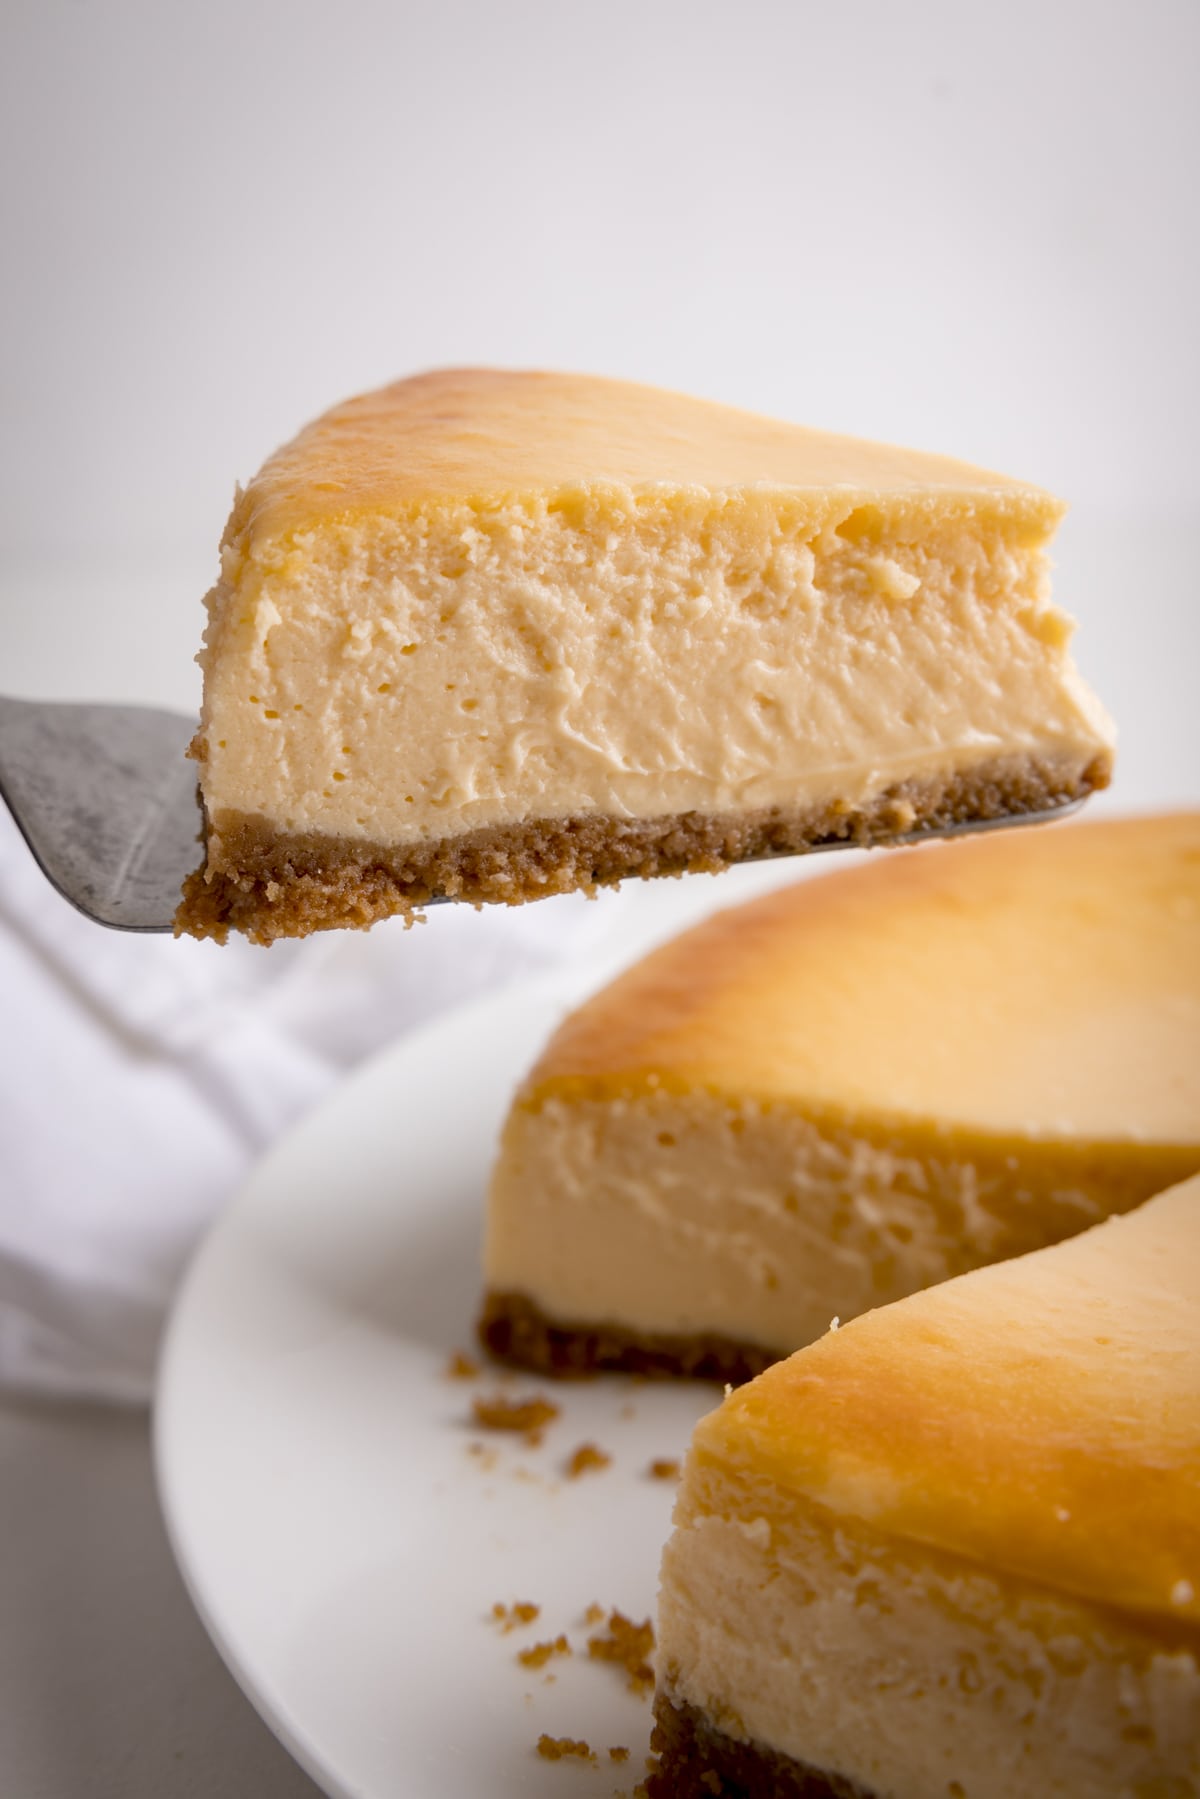 A close up of a slice being take from a New York Cheesecake against a white background.